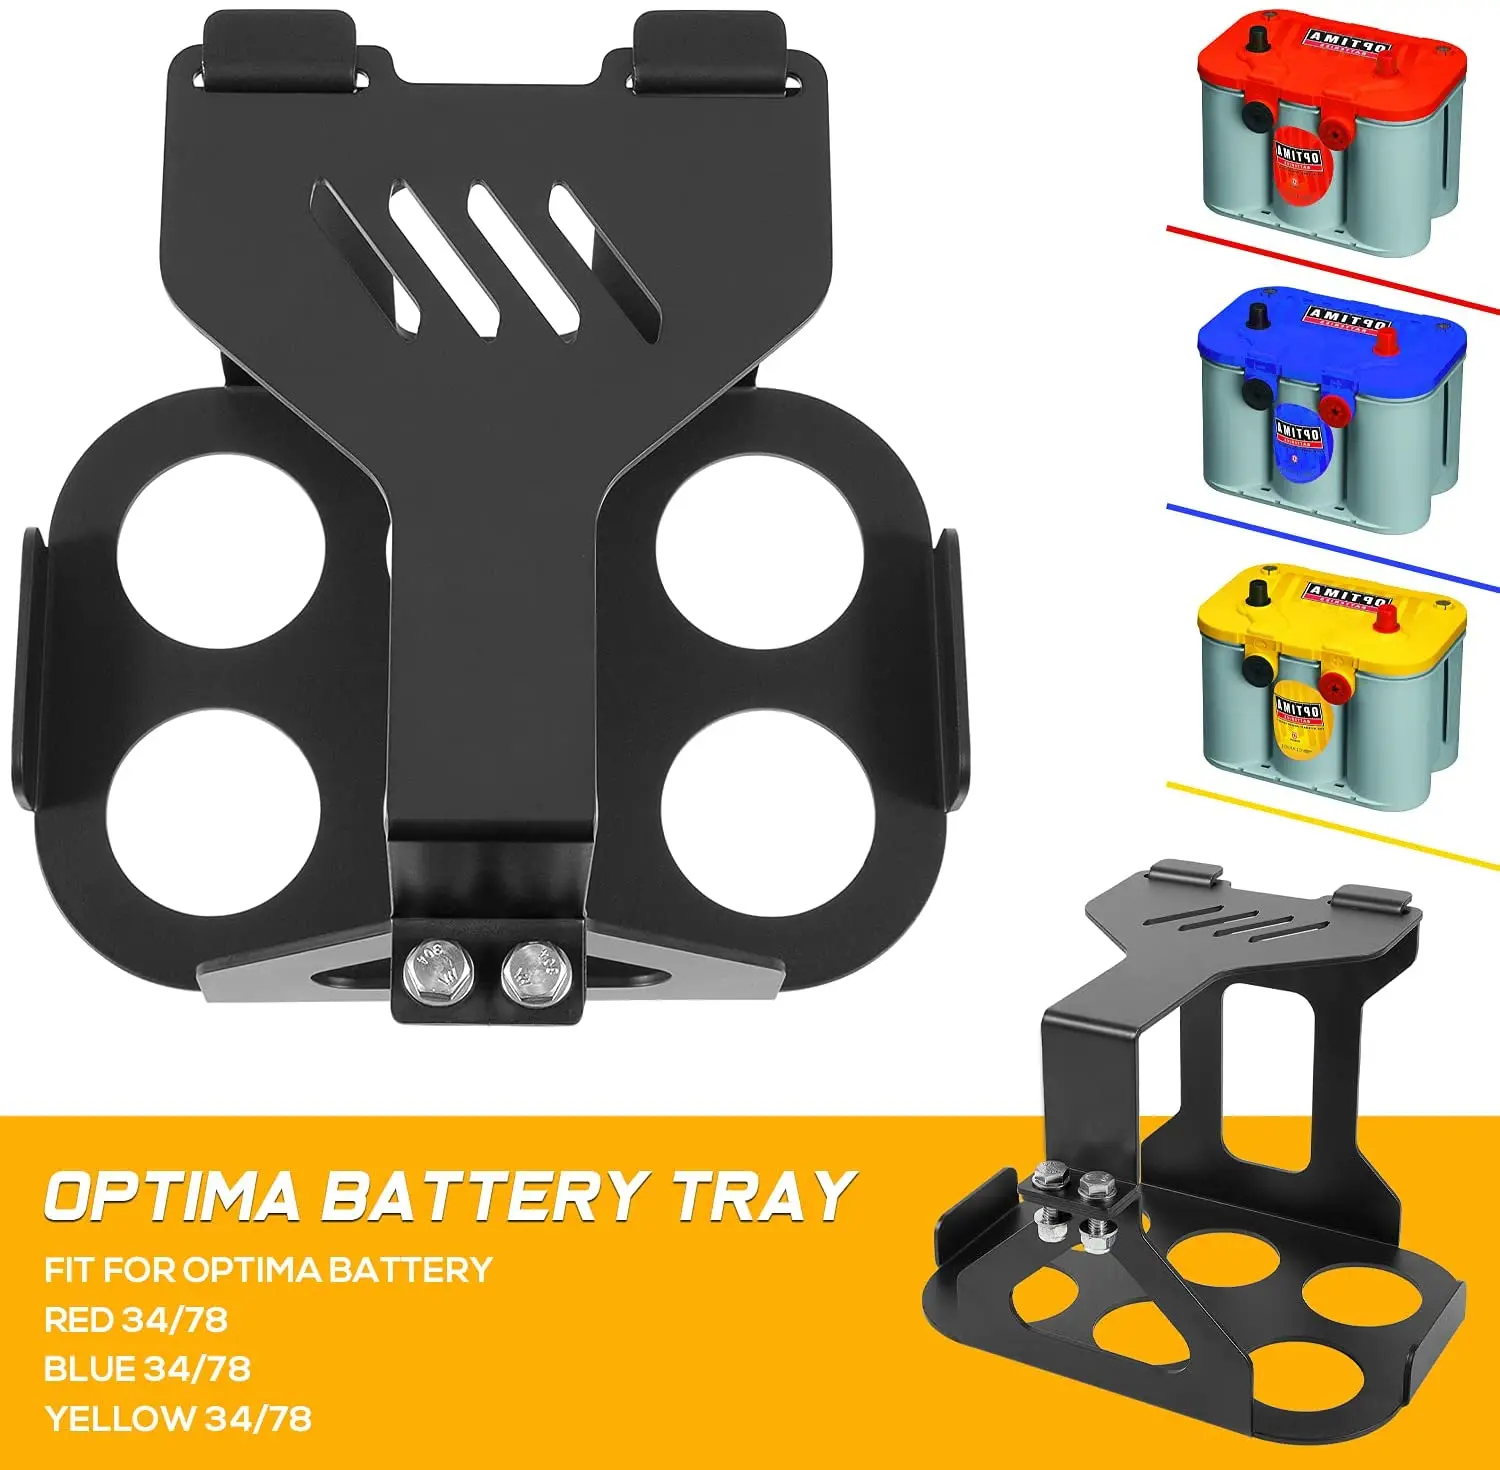 Truck Optima Battery Tray Kit Truck Battery Mount Holder Box fit for Optima Battery Red 34/78 Yellow 34/78 Blue 34/78 